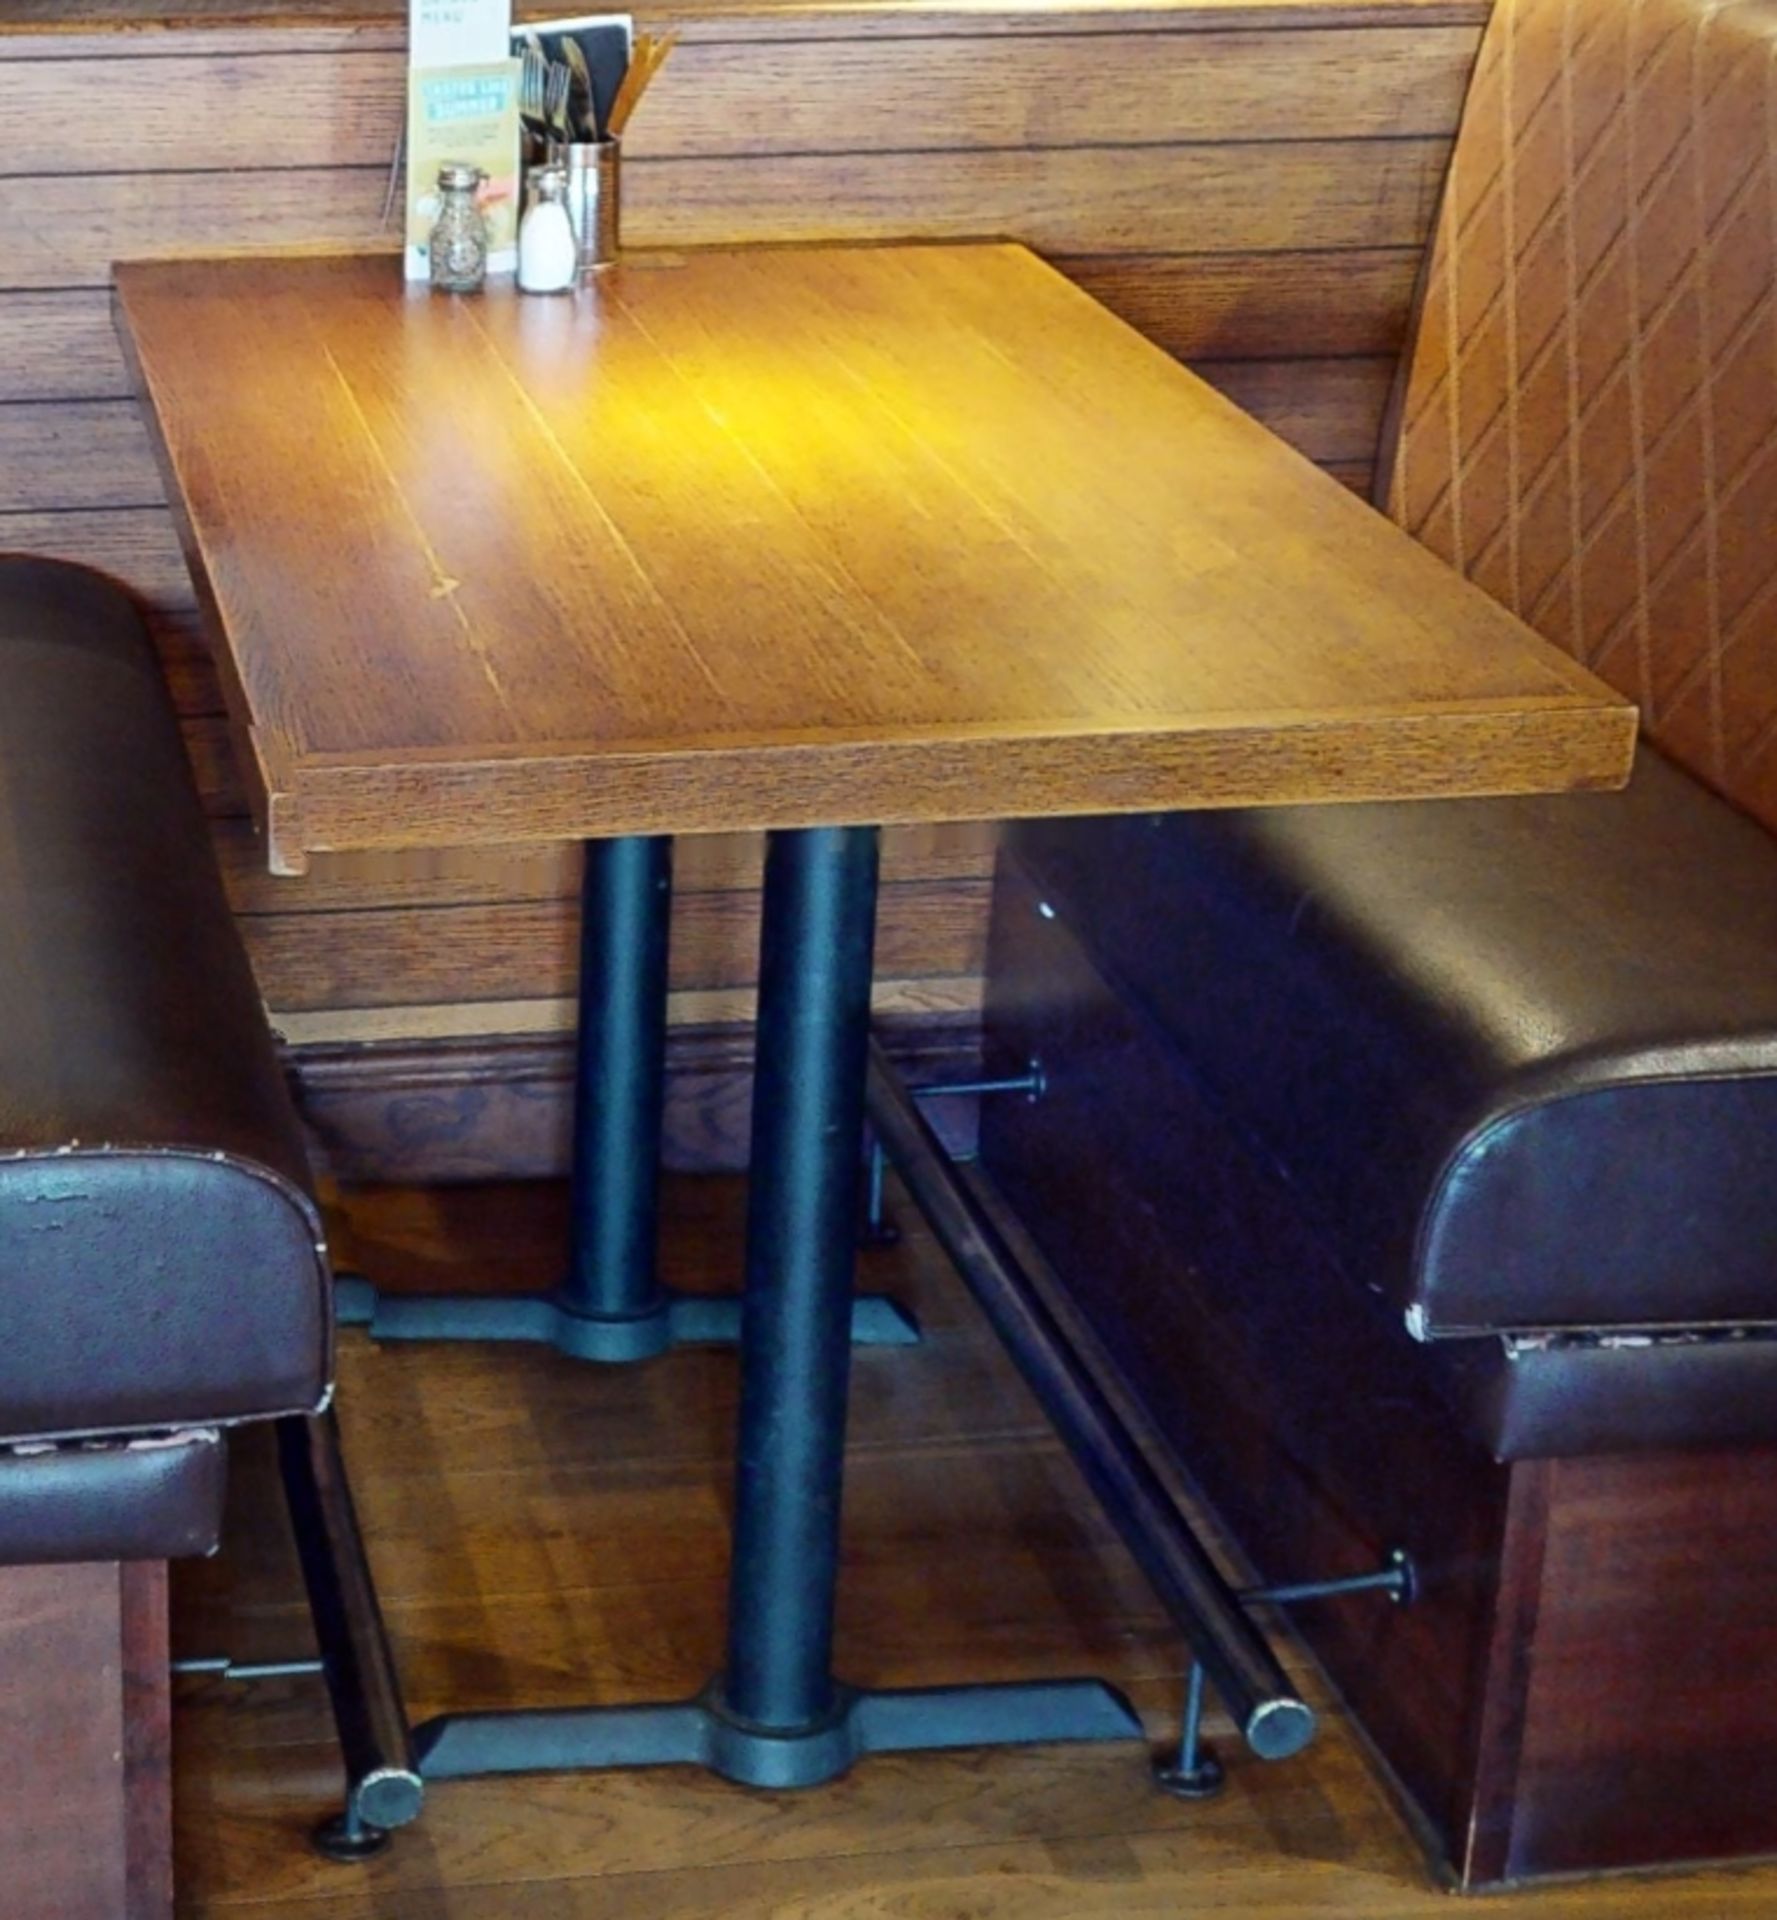 1 x Four Seater Rectangular High Top Restaurant Dining Table With Cast Iron Bases and Wood - Image 3 of 3